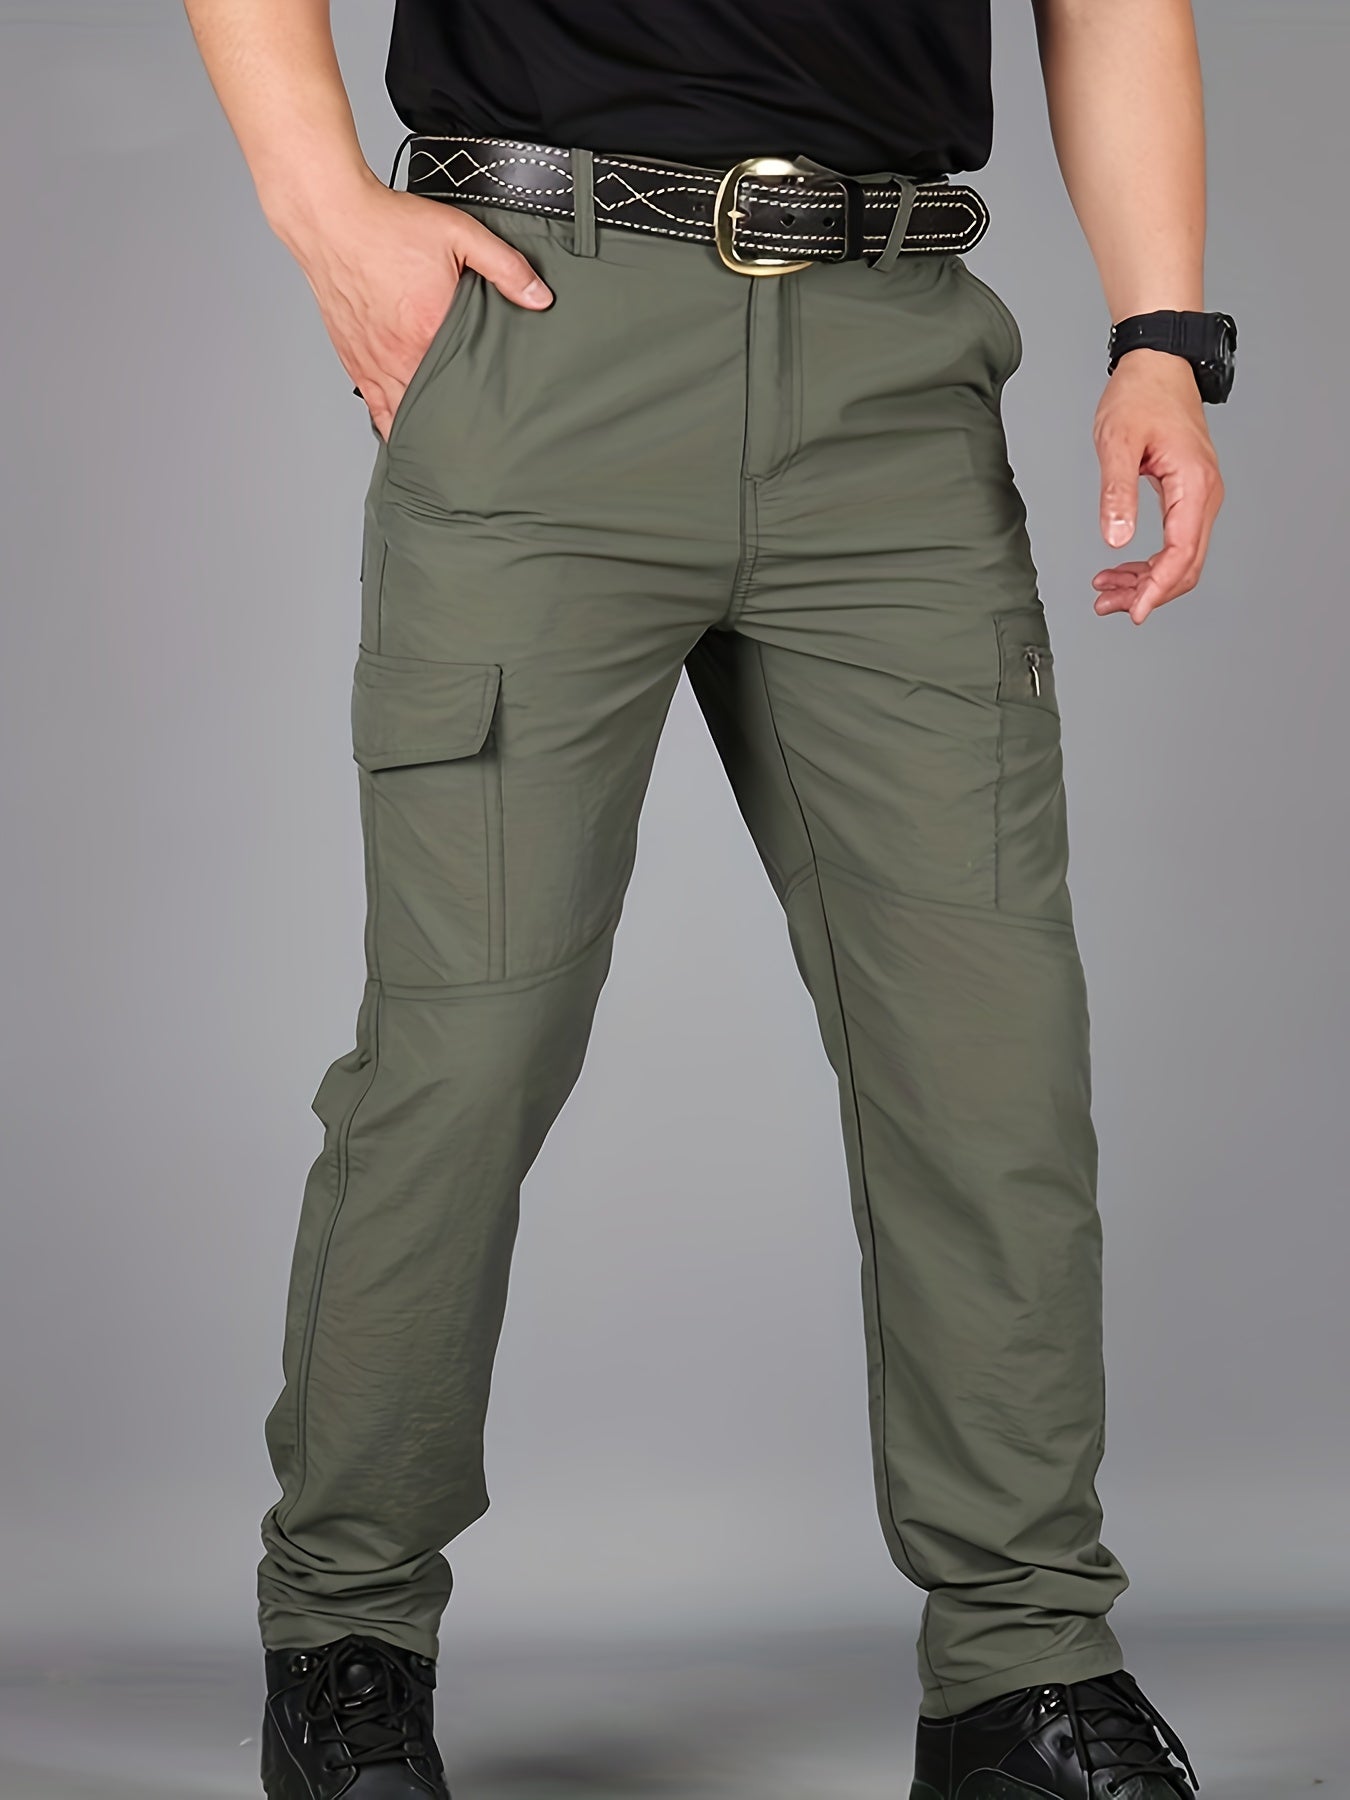 Men's Flap Pocket Cargo Pants, Drawstring Comfy Active Stretch Breathable Trousers For Outdoor Activities